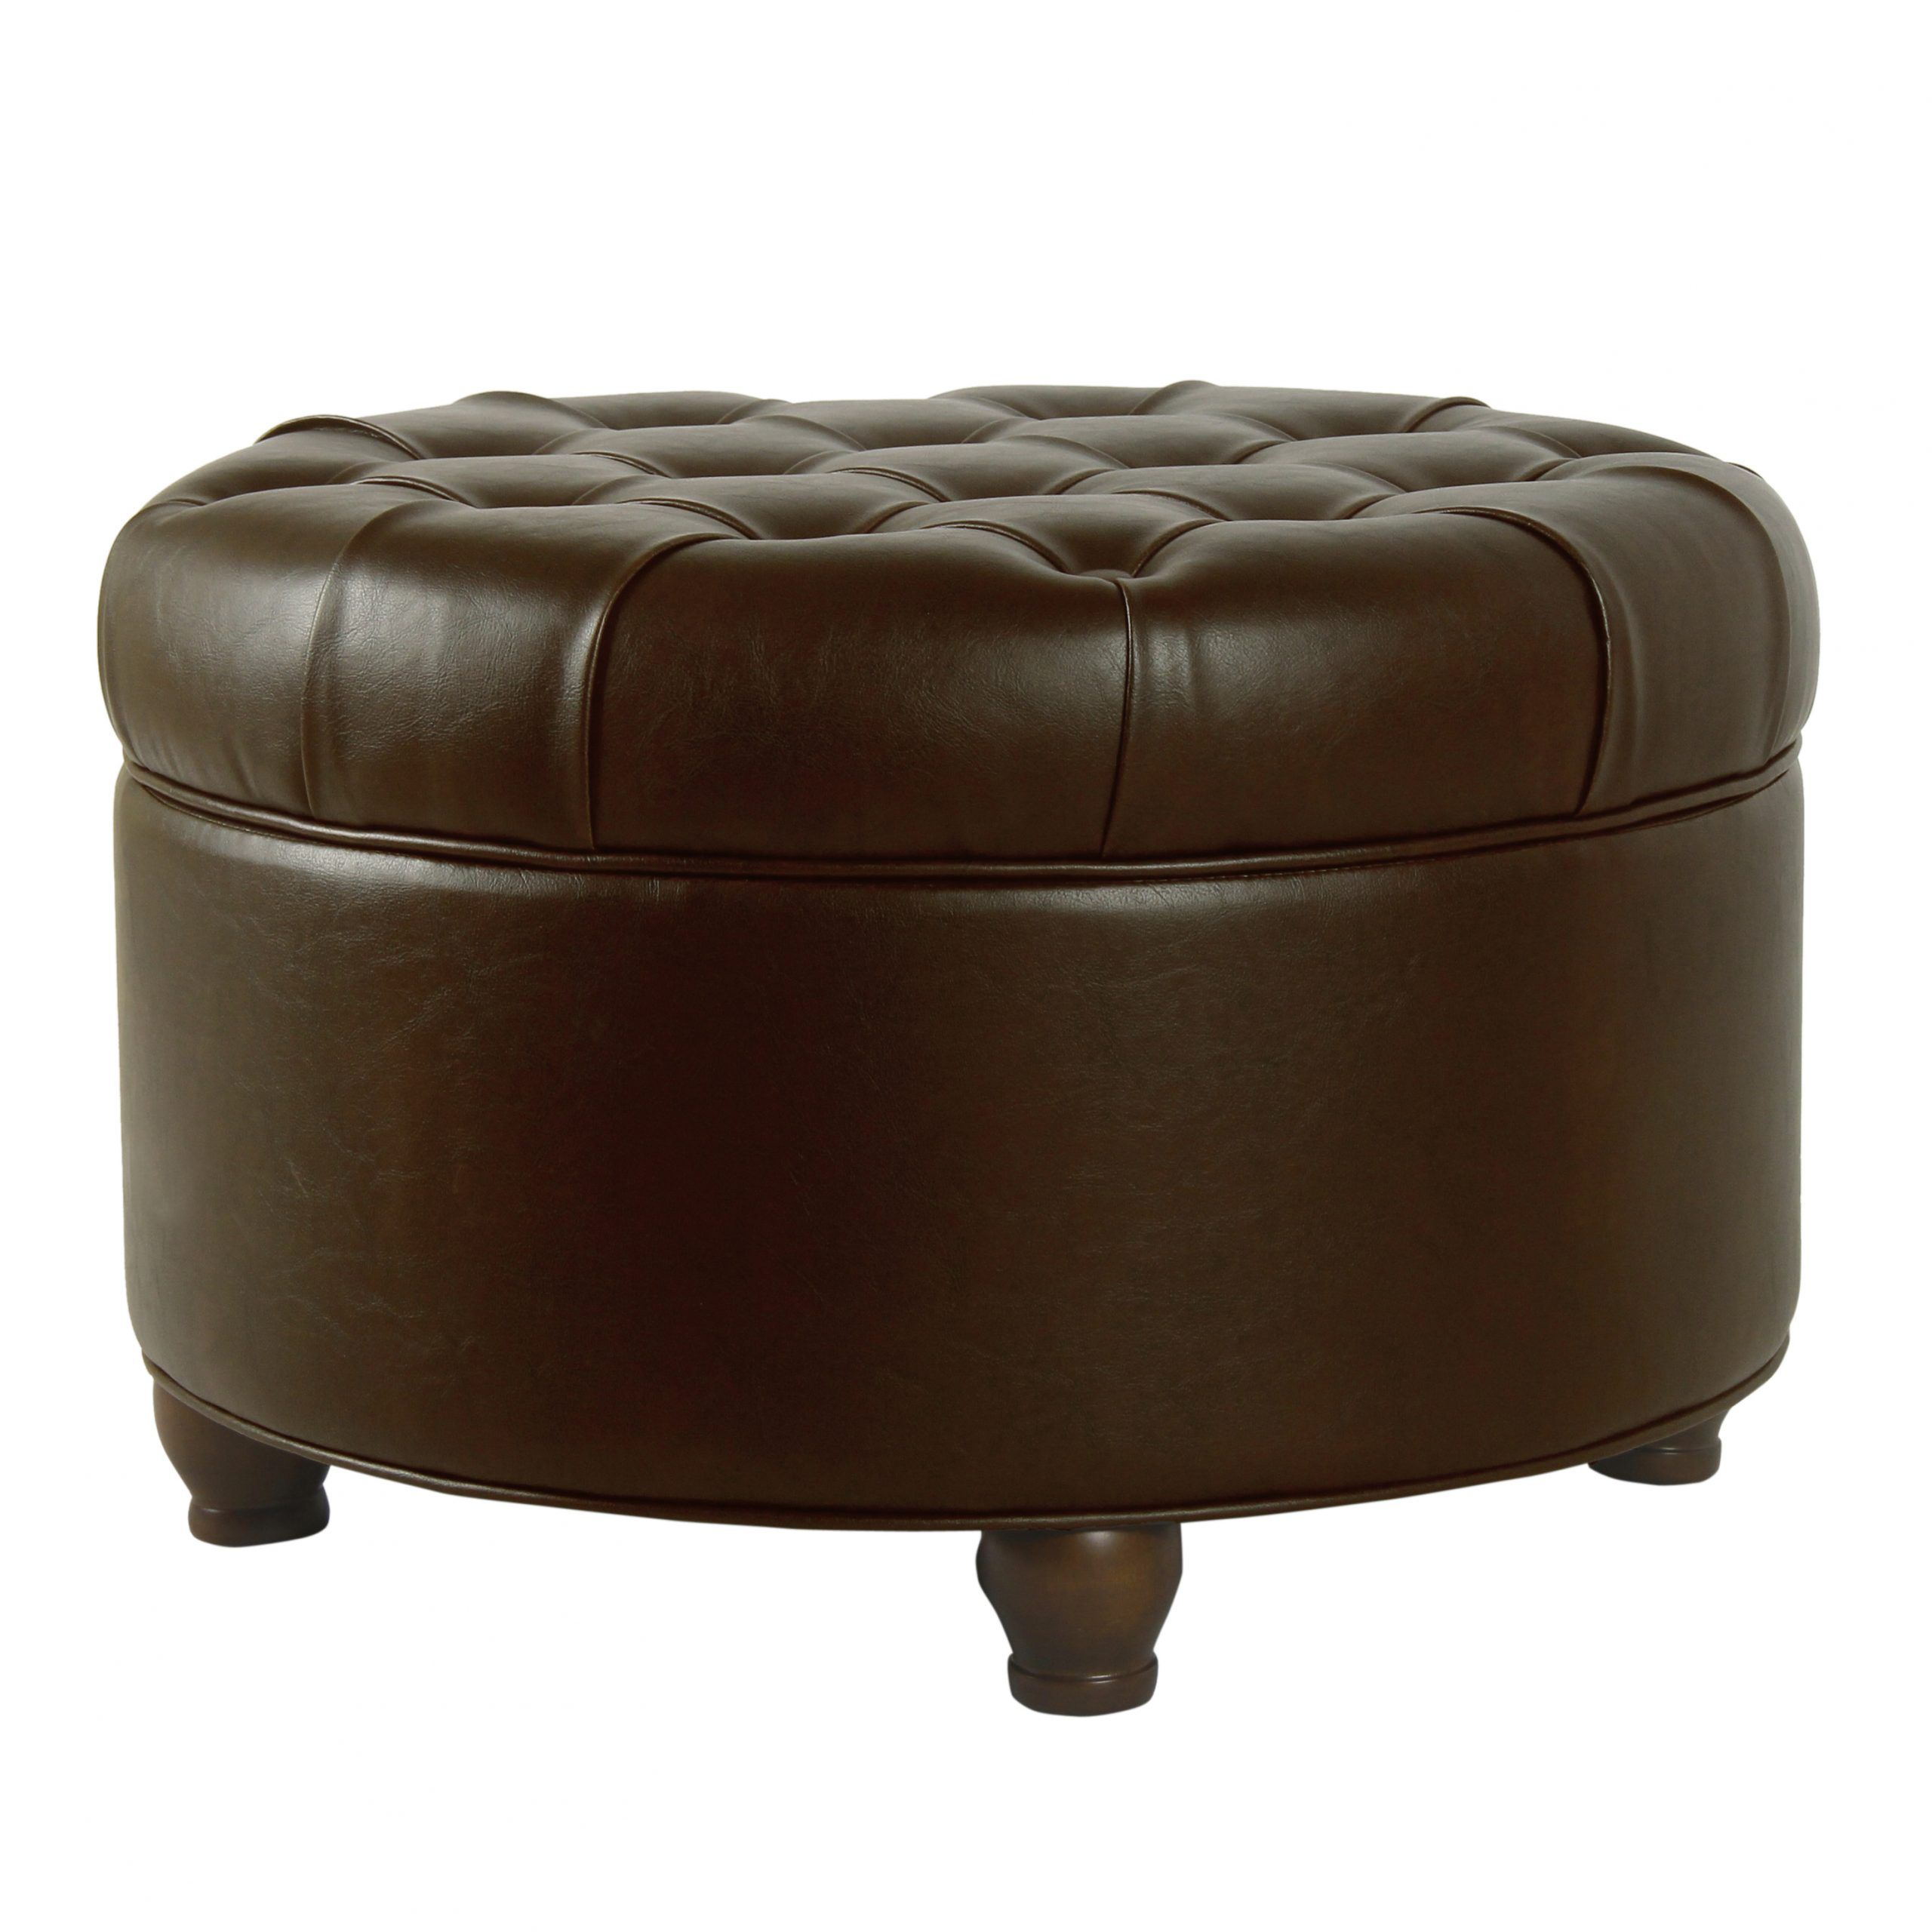 Orange Tufted Faux Leather Storage Ottomans Throughout 2017 Homepop Large Tufted Round Storage Ottoman, Multiple Colors – Walmart (View 3 of 10)